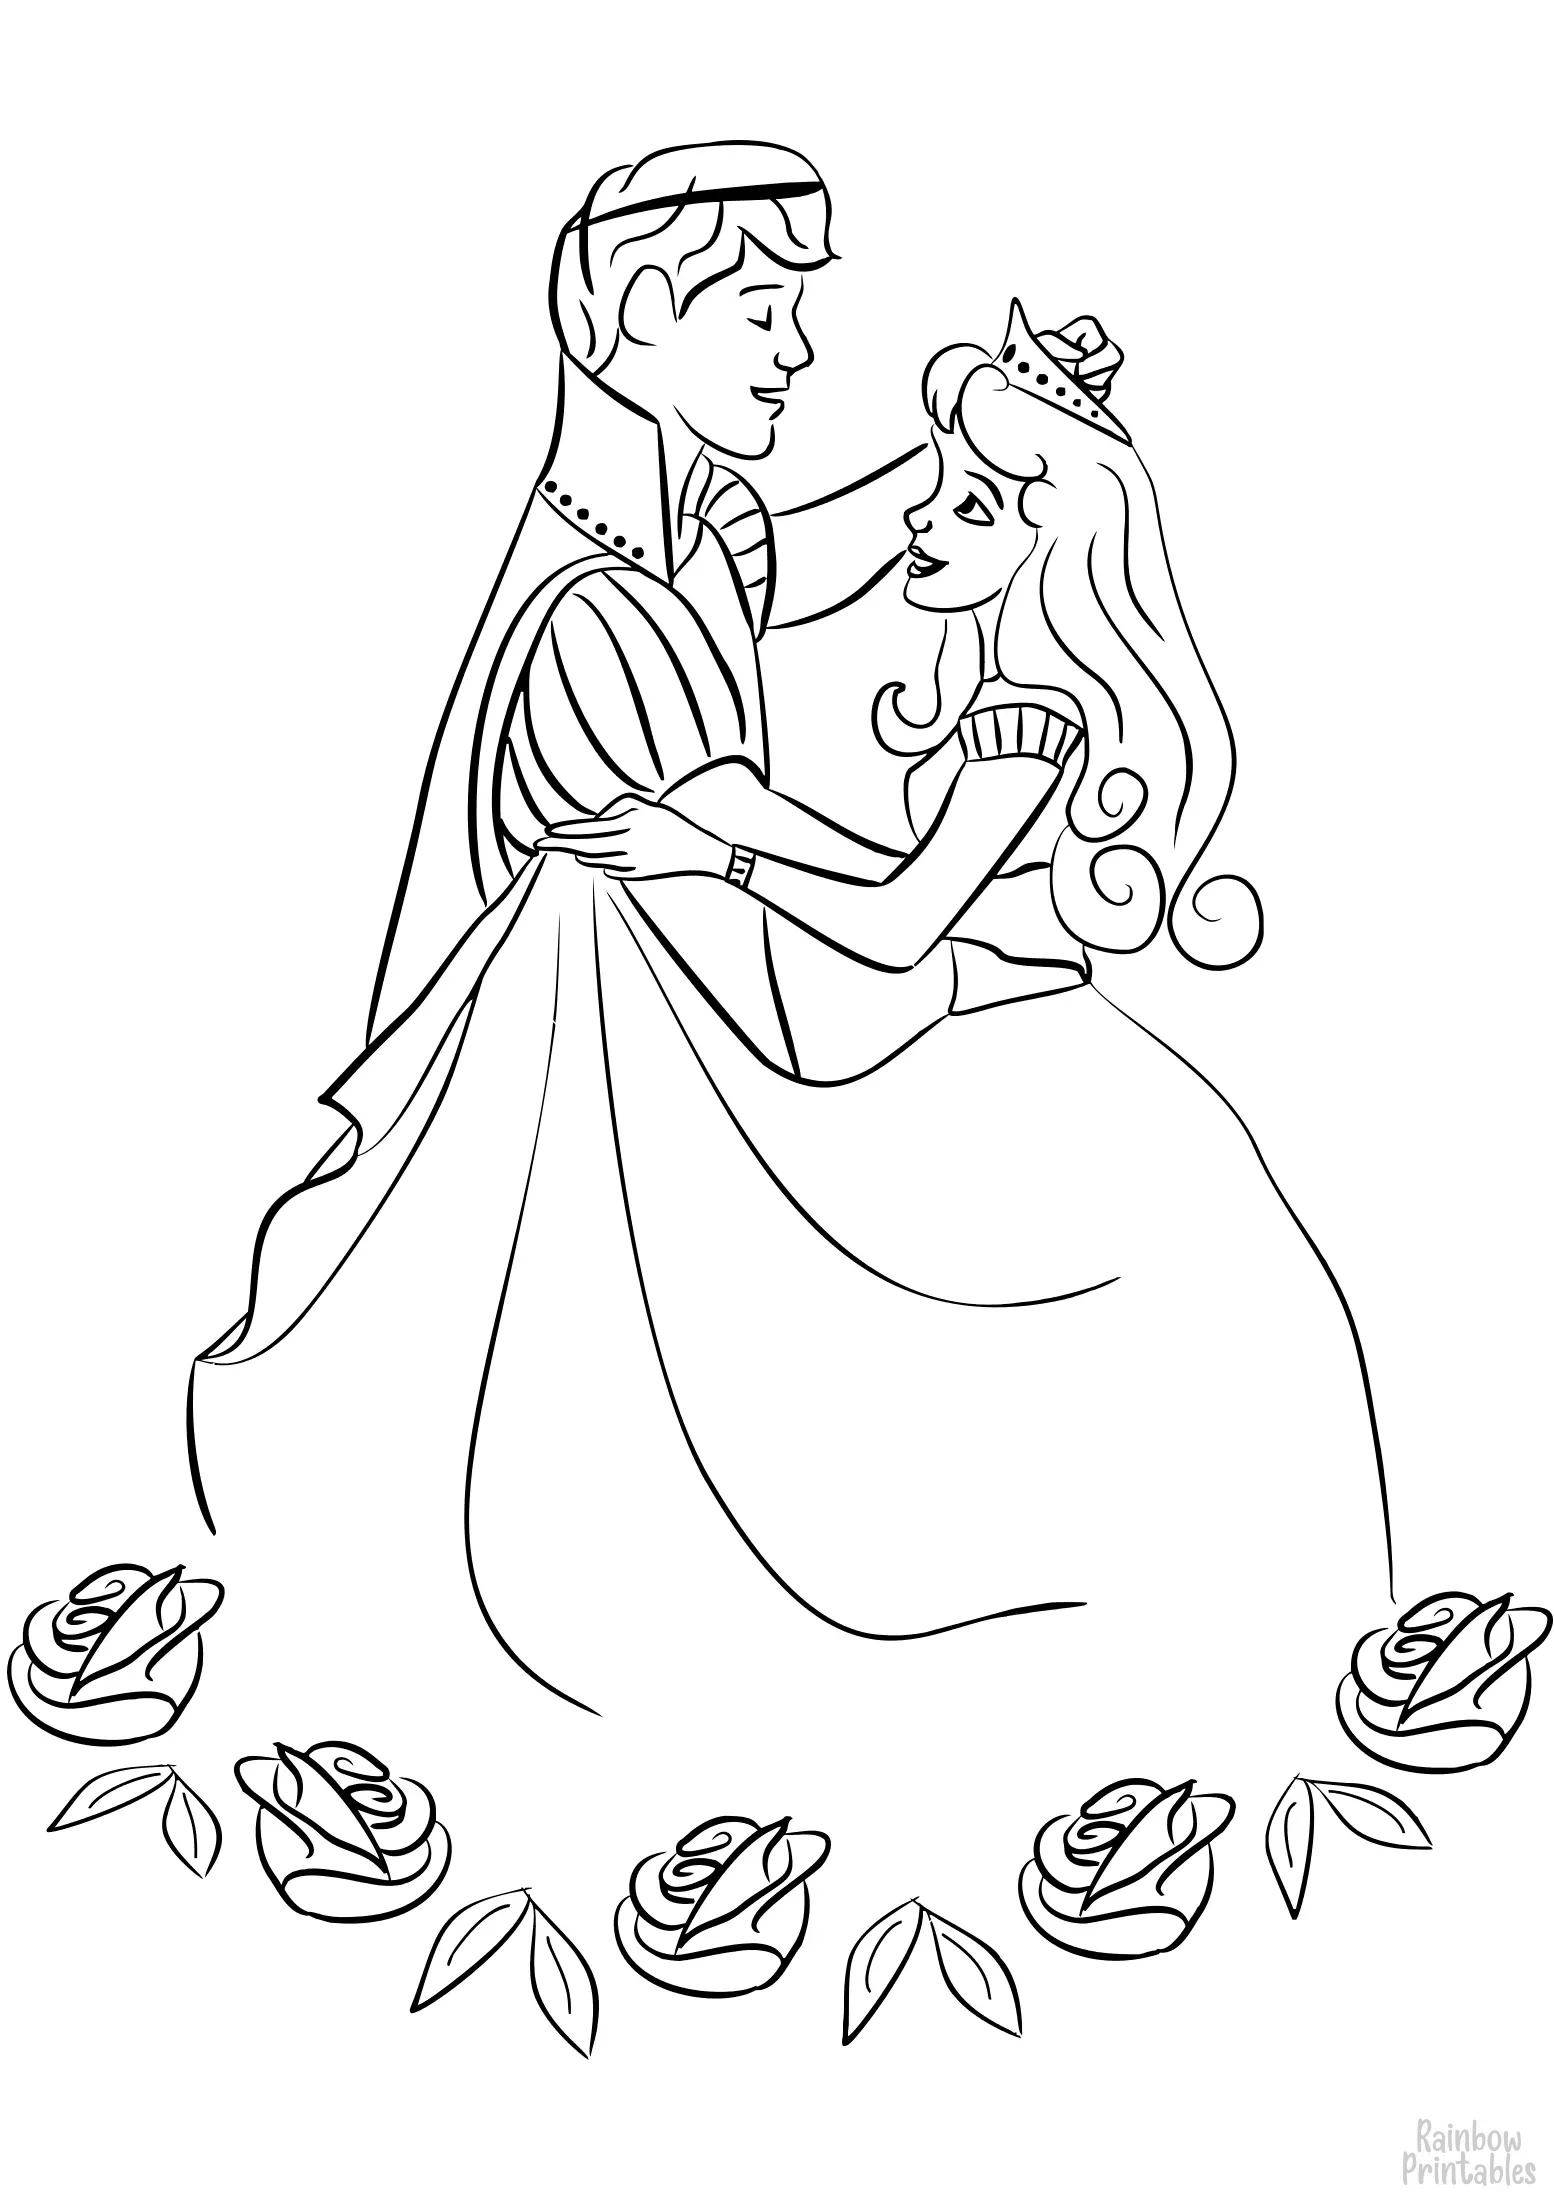 prince-and-princess-dancing-coloring-page SLEEPING BEAUTY Free Clipart Coloring Pages for Kids Adults Art Activities Line Art